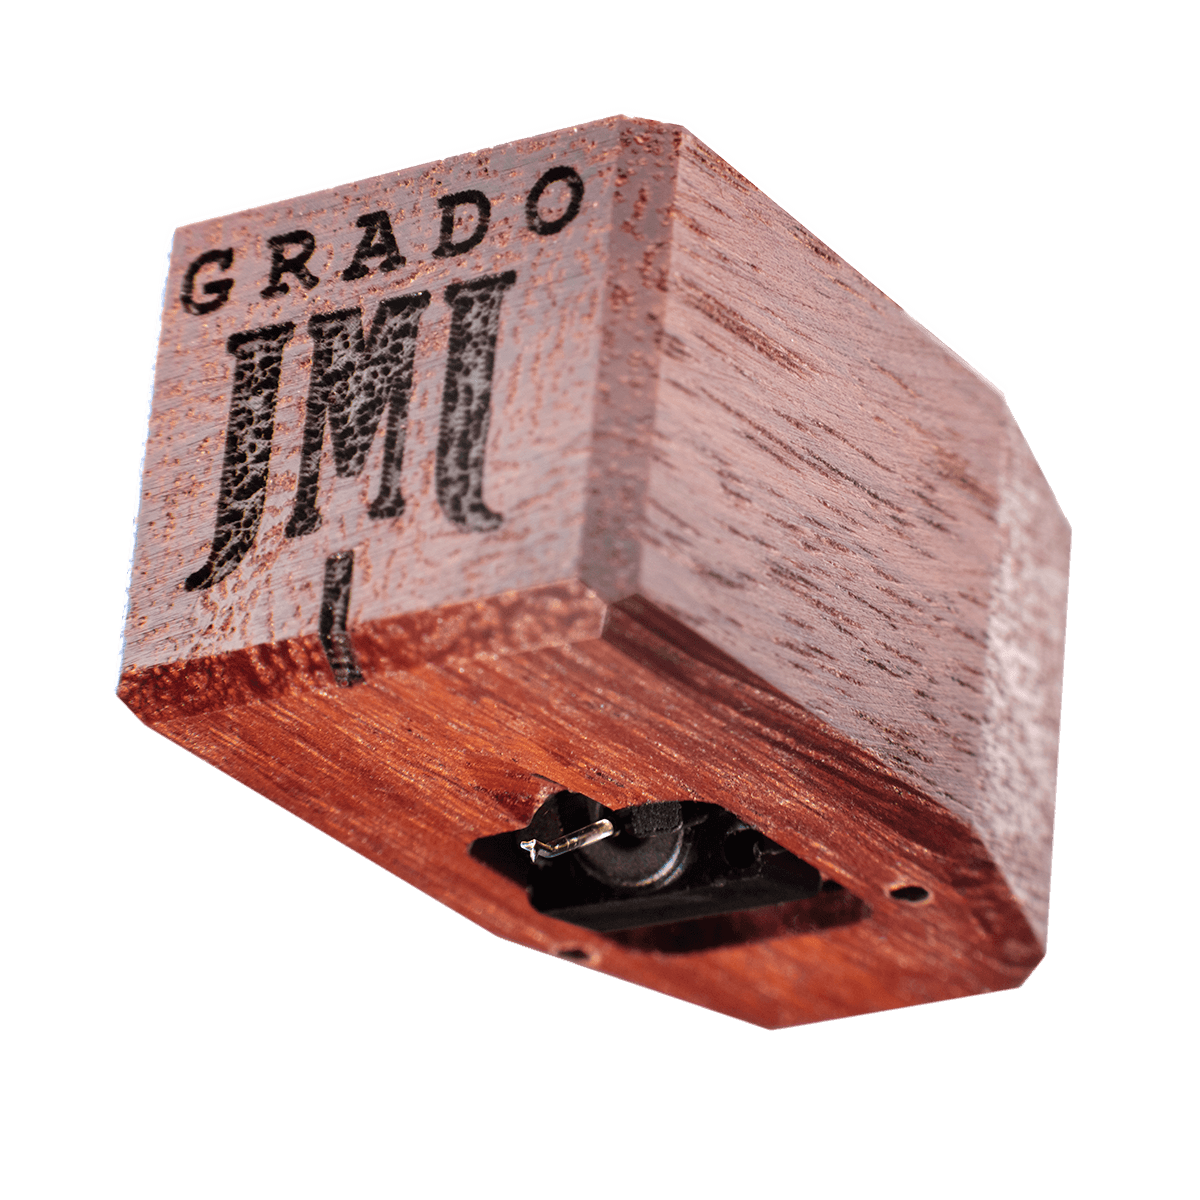 Grado Labs Statement 3 photo cartridge view from bottom up